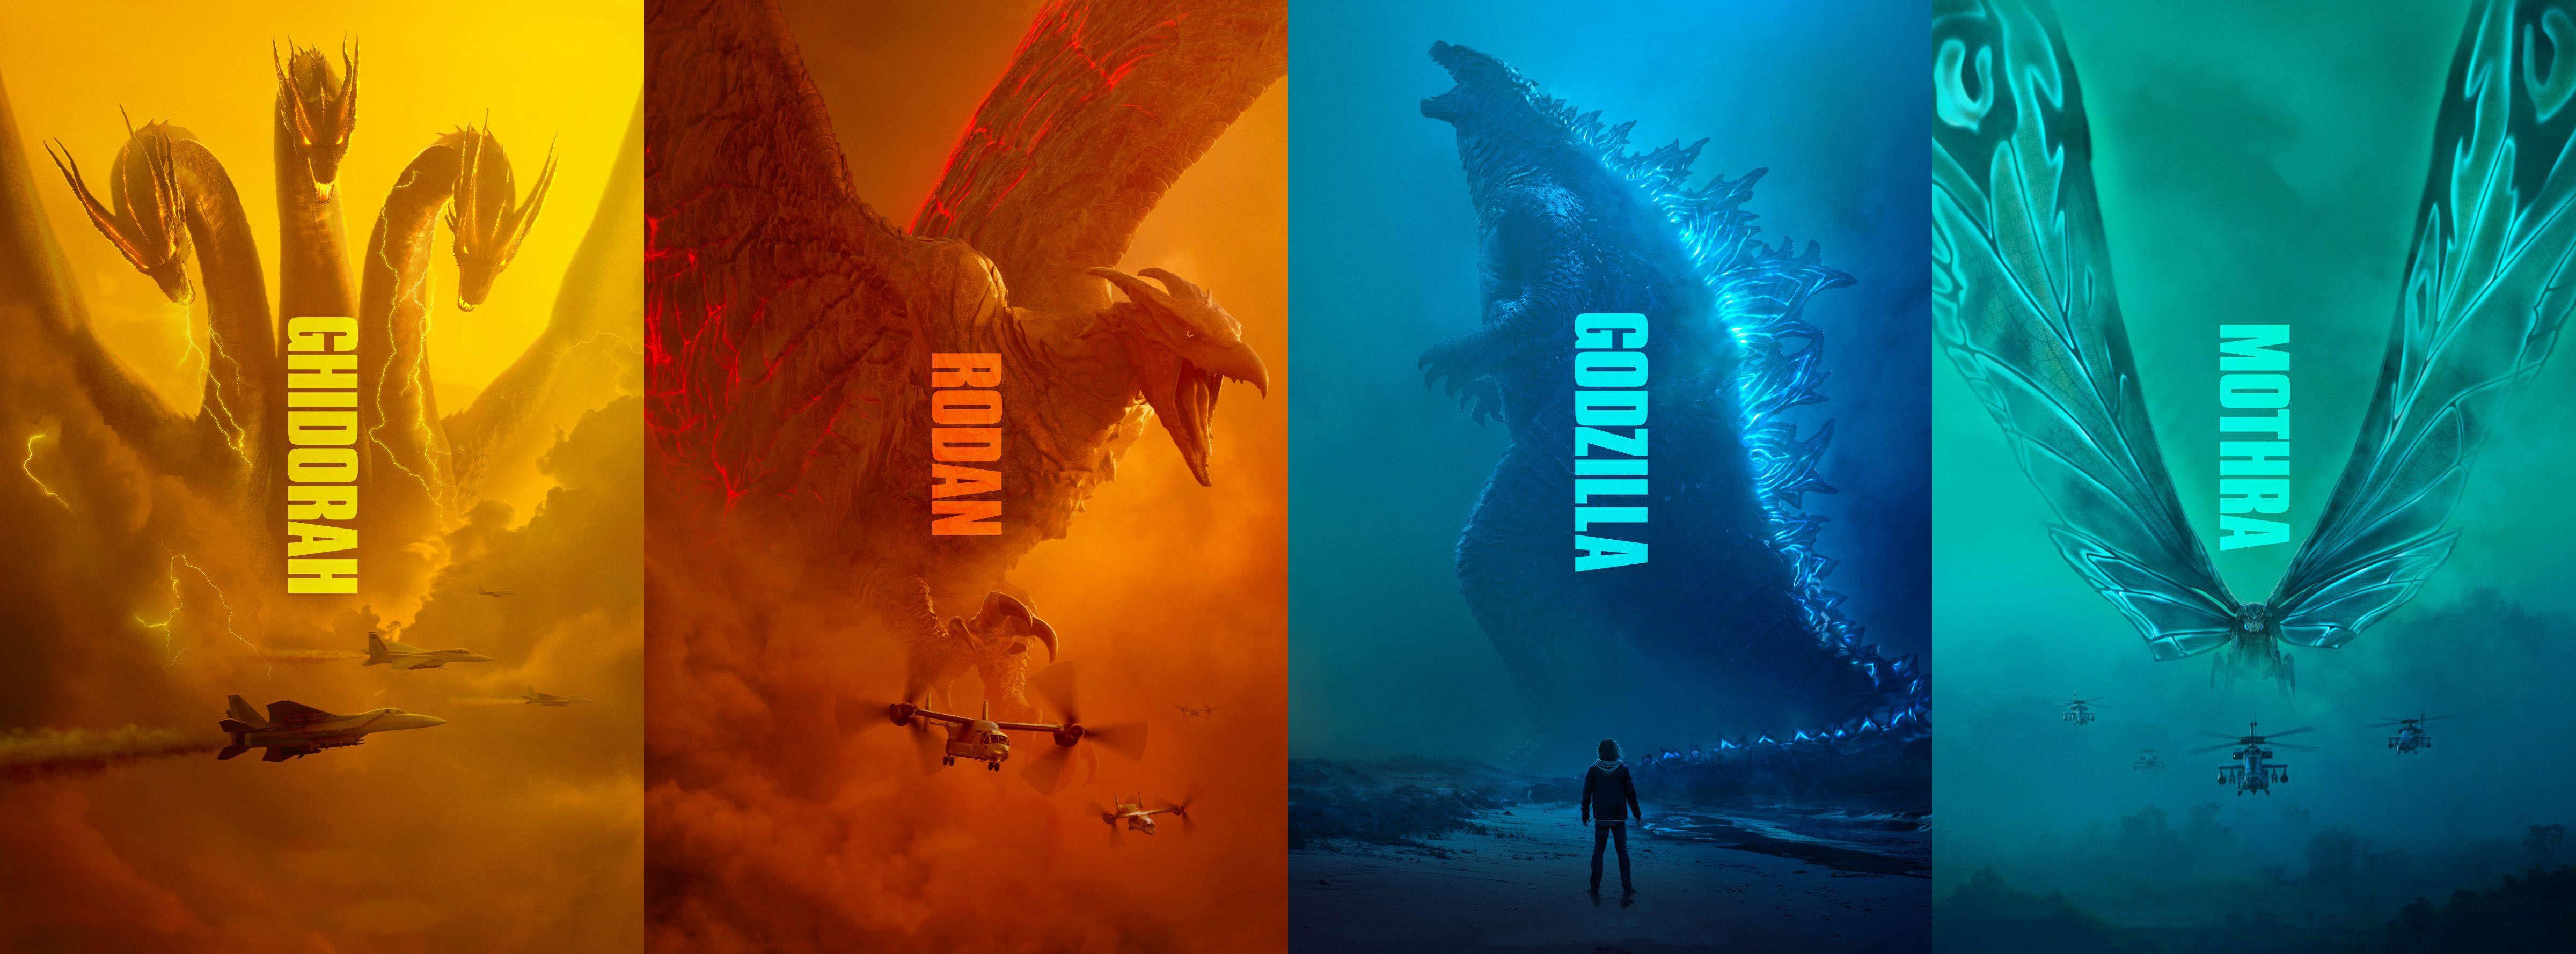 I made an Ultra Wide wallpaper from the Godzilla posters